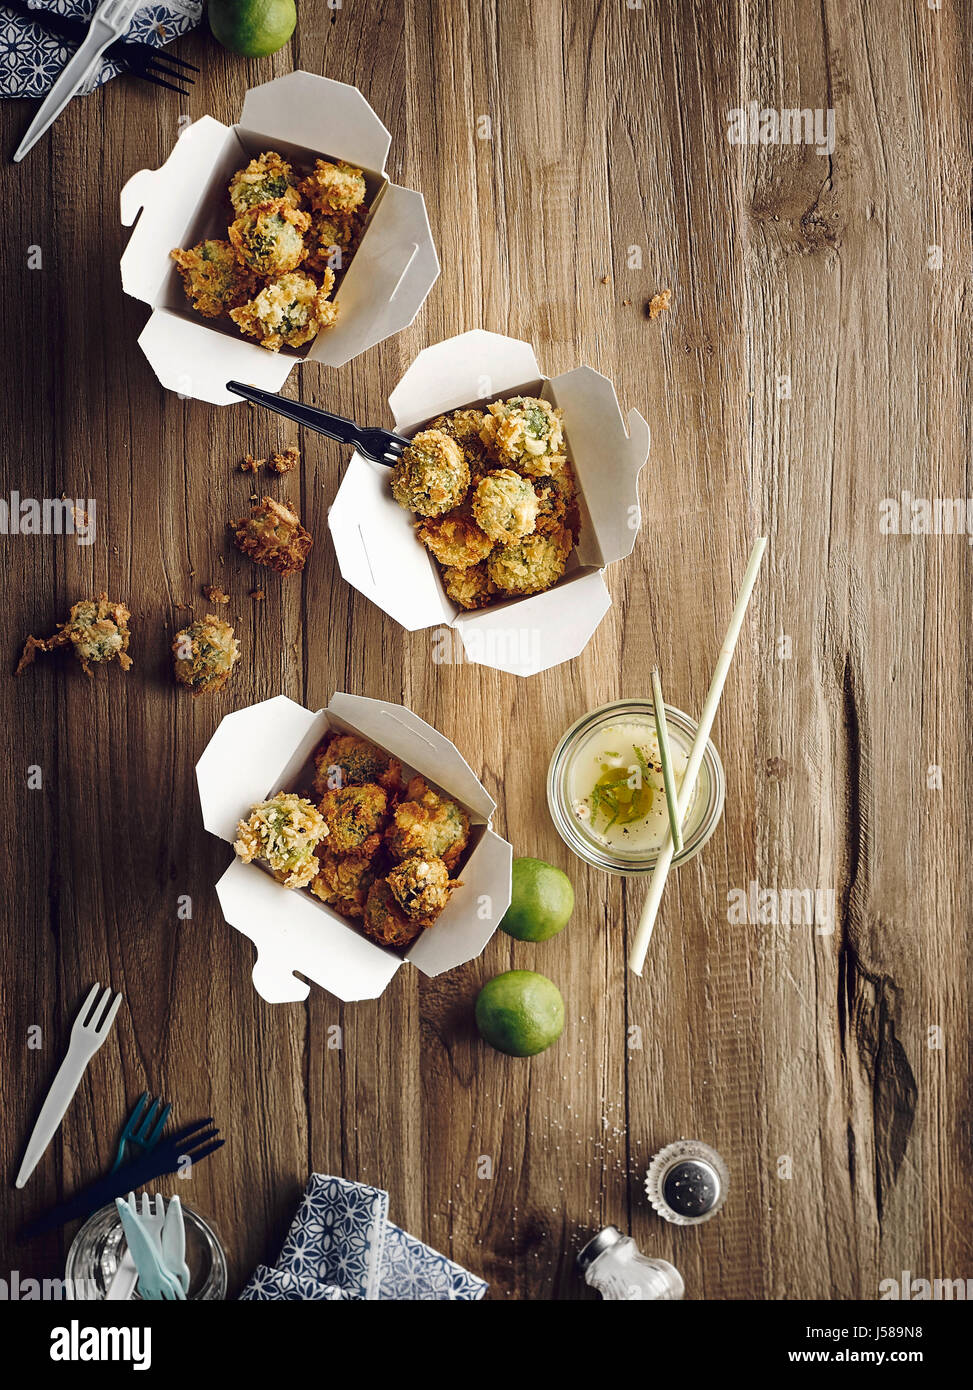 Crisp deep fried brussel sprouts Stock Photo